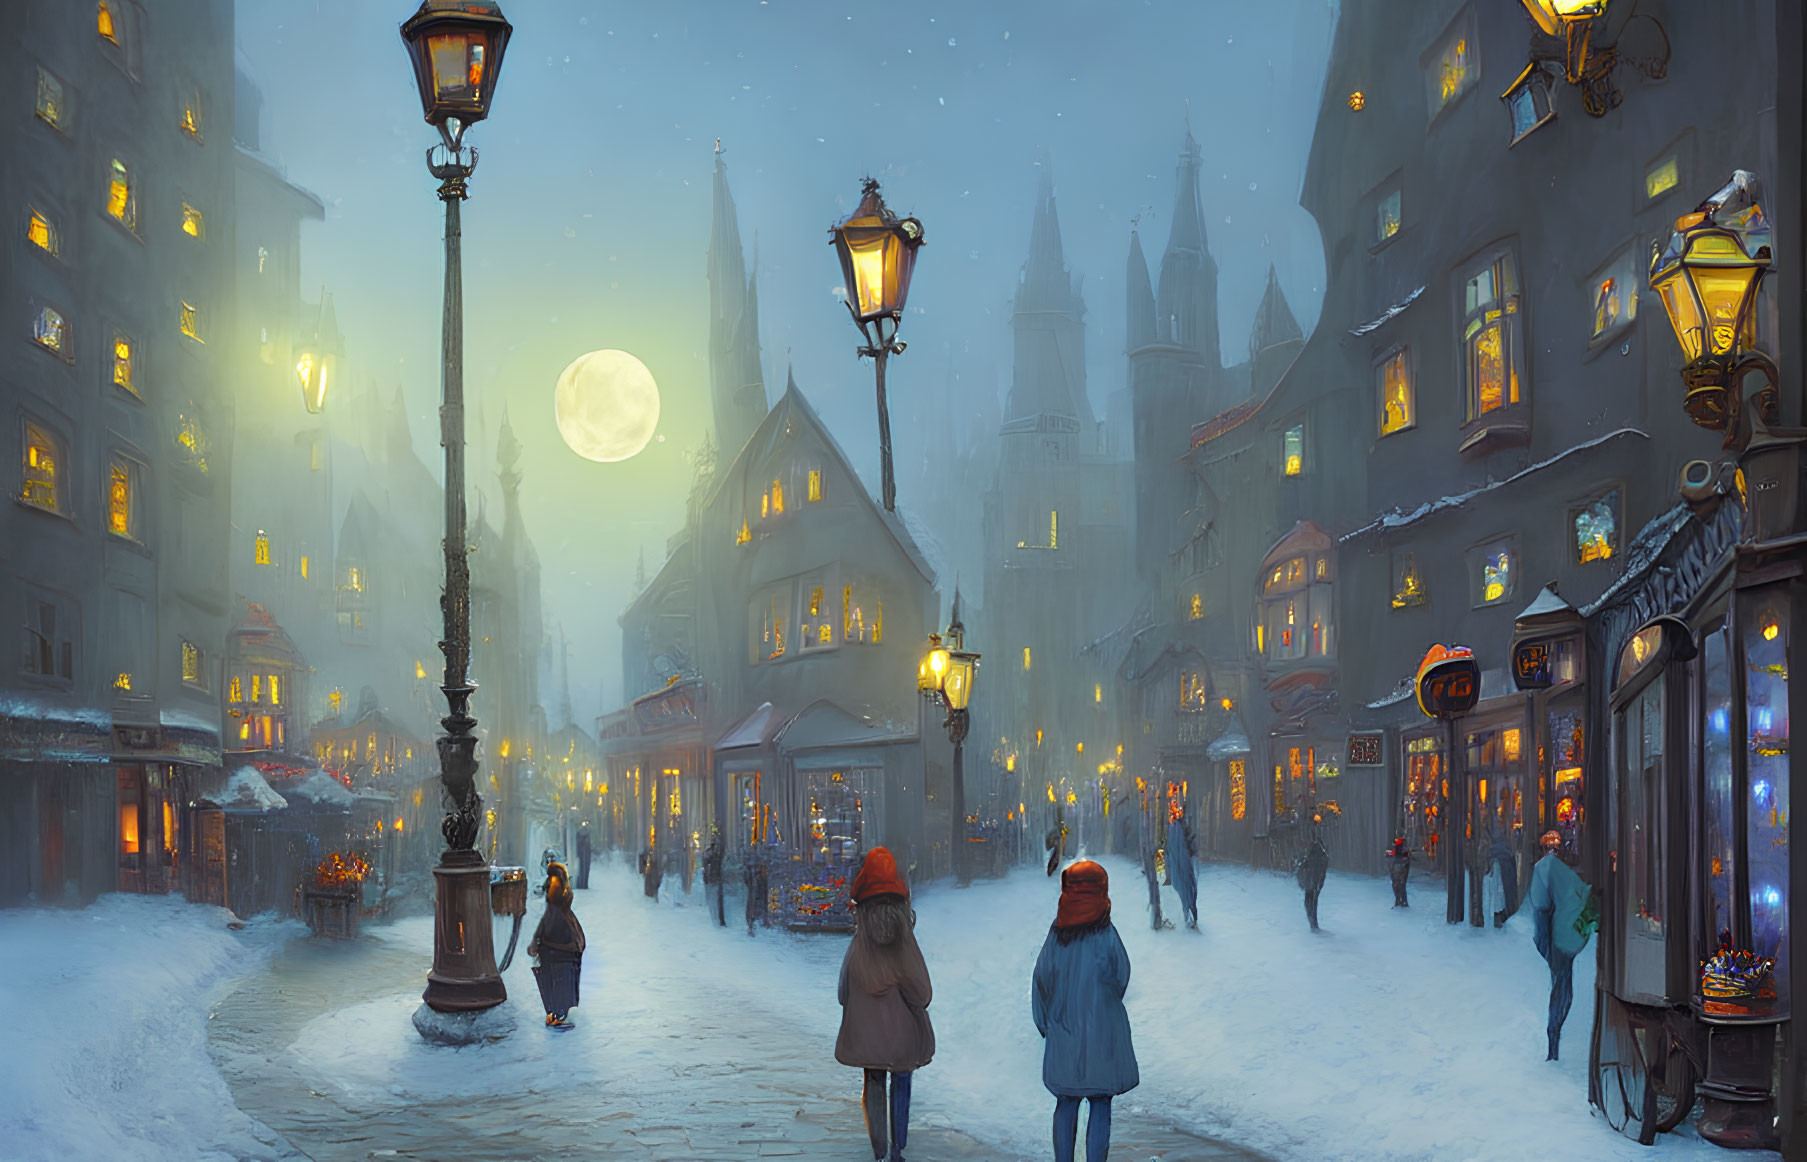 Snowy evening street scene with warm street lamps, full moon, and people walking.